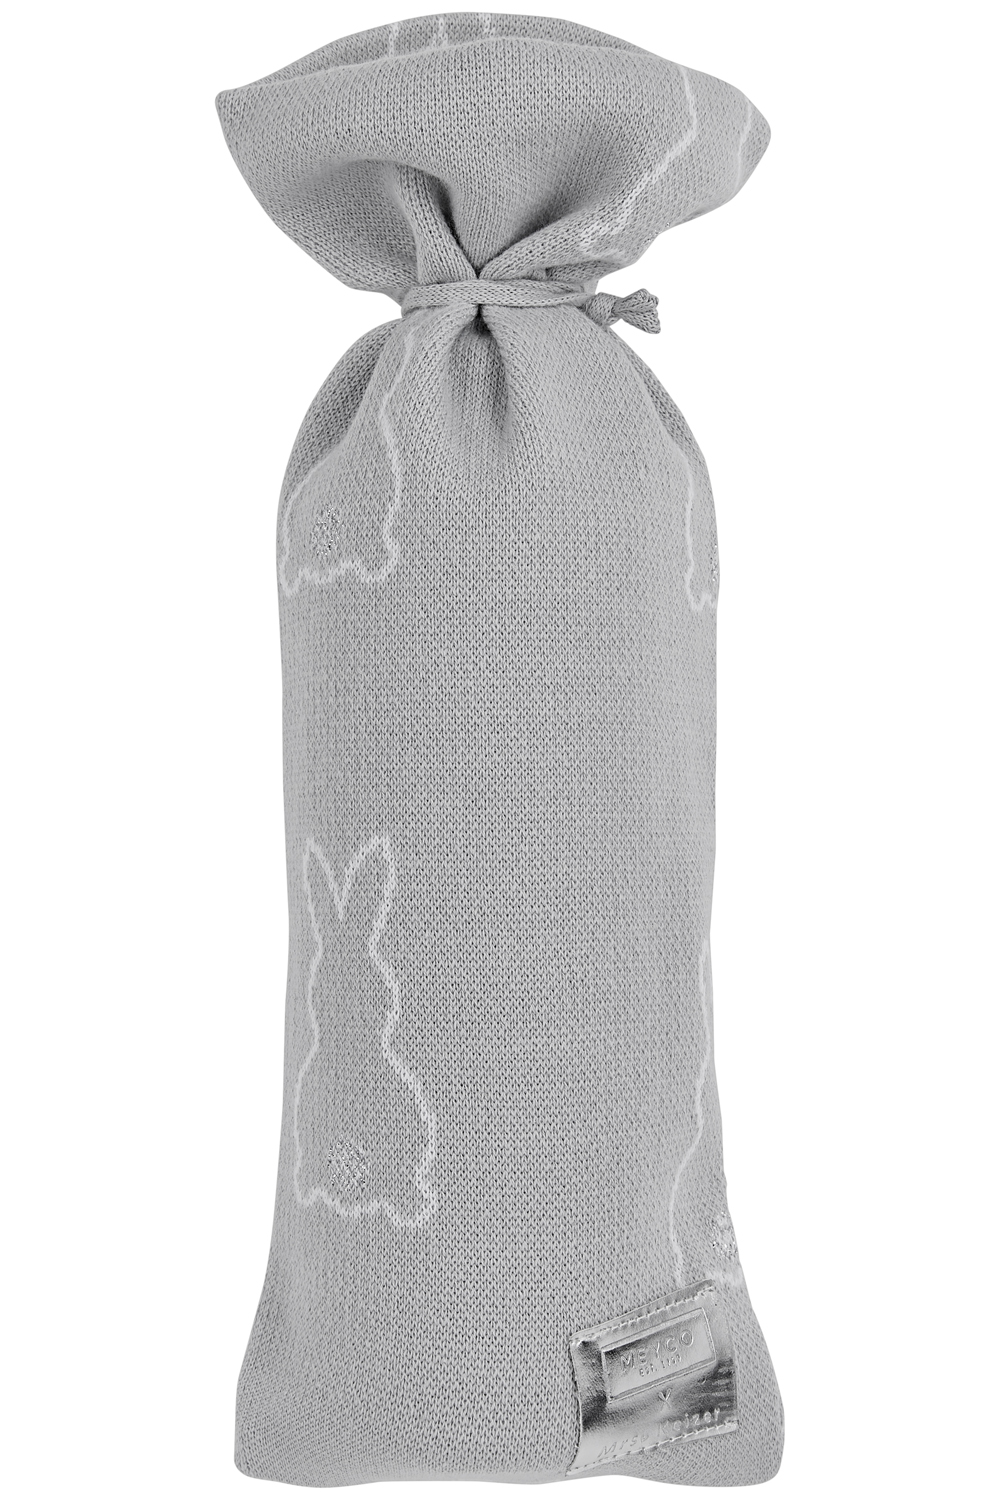 Hot water bottle cover Rabbit - silver